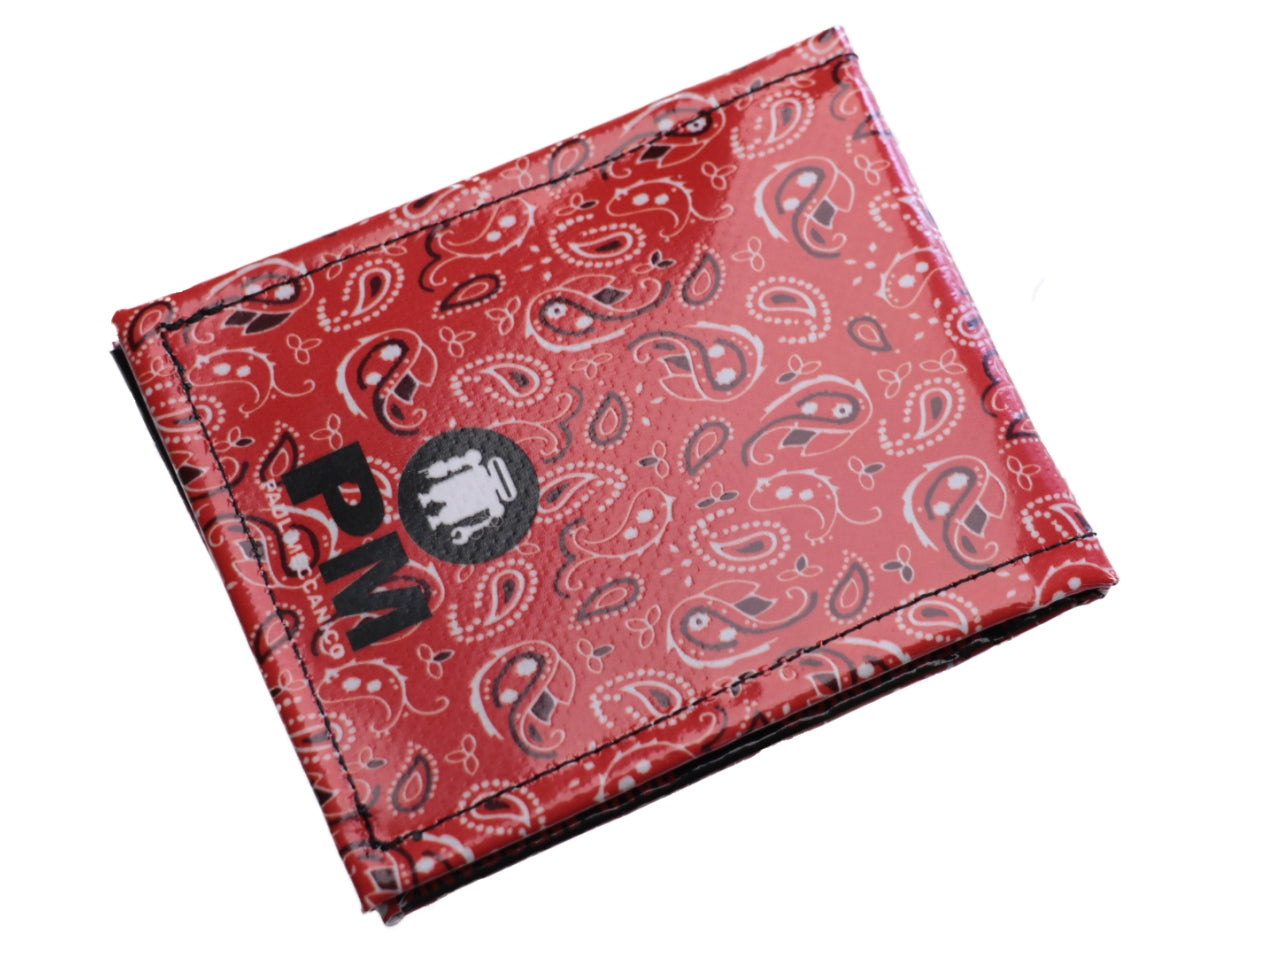 MEN'S WALLET RED WITH PAISLEY FANTASY. MODEL CRIK MADE OF LORRY TARPAULIN. - Limited Edition Paul Meccanico